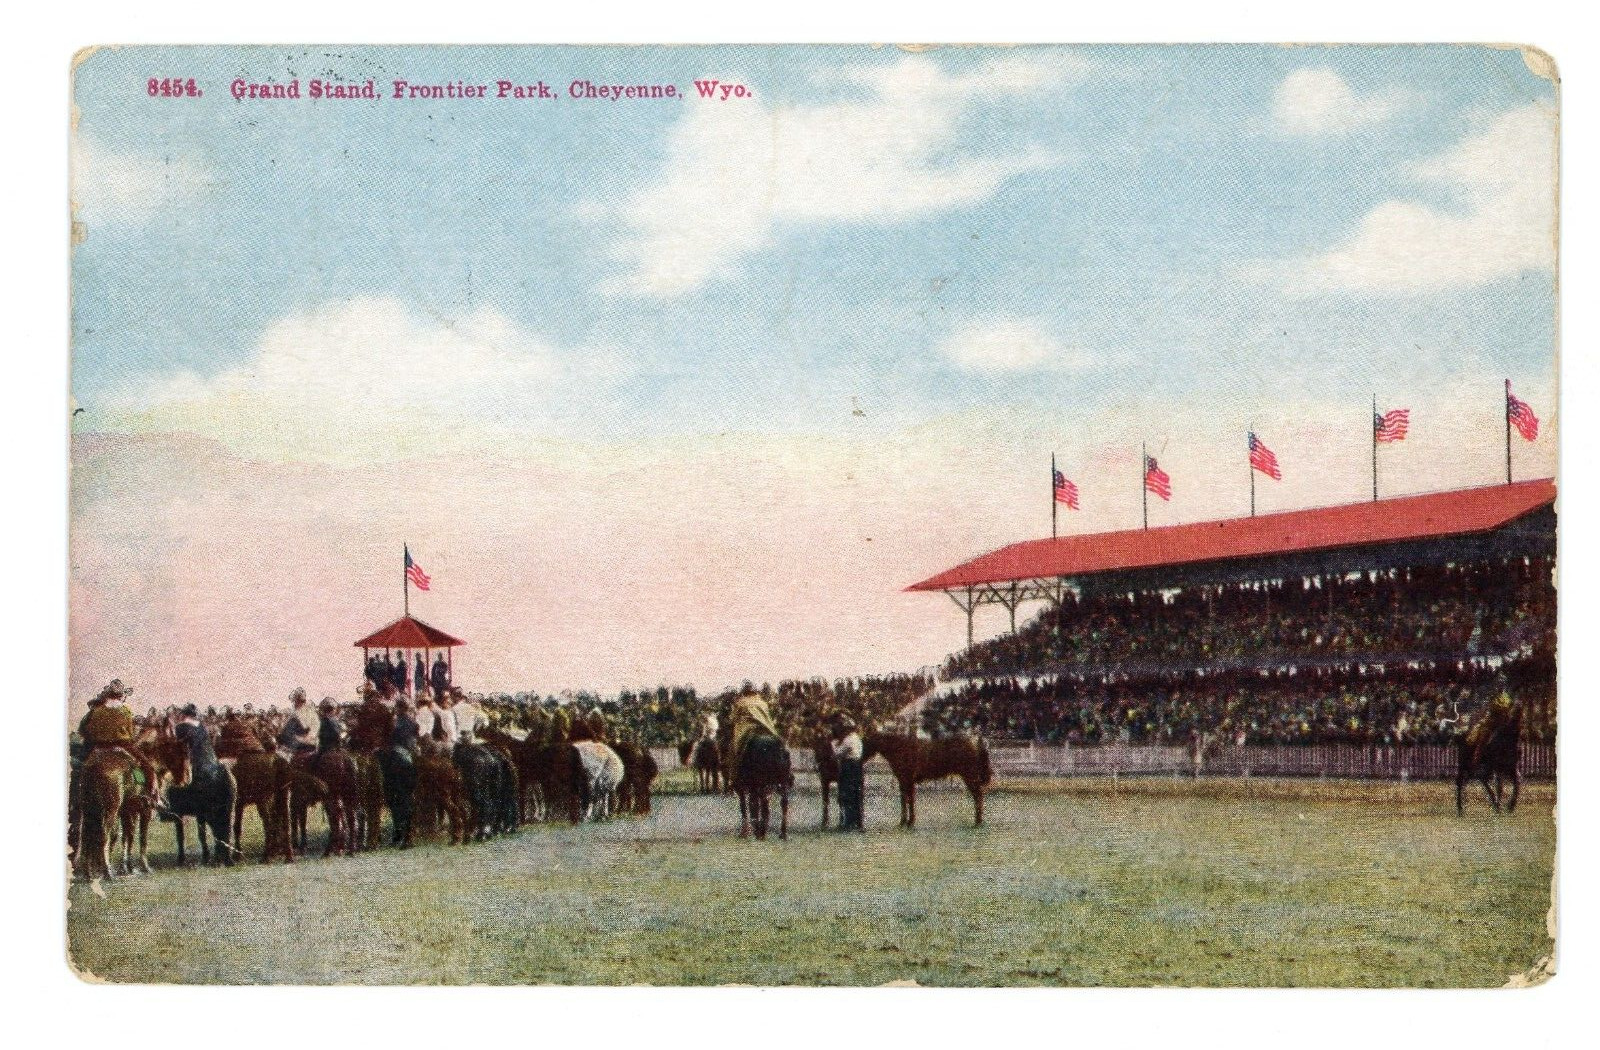 Cheyenne Wyoming Grand Stand Frontier Park Horse Race Track Antique Postcard